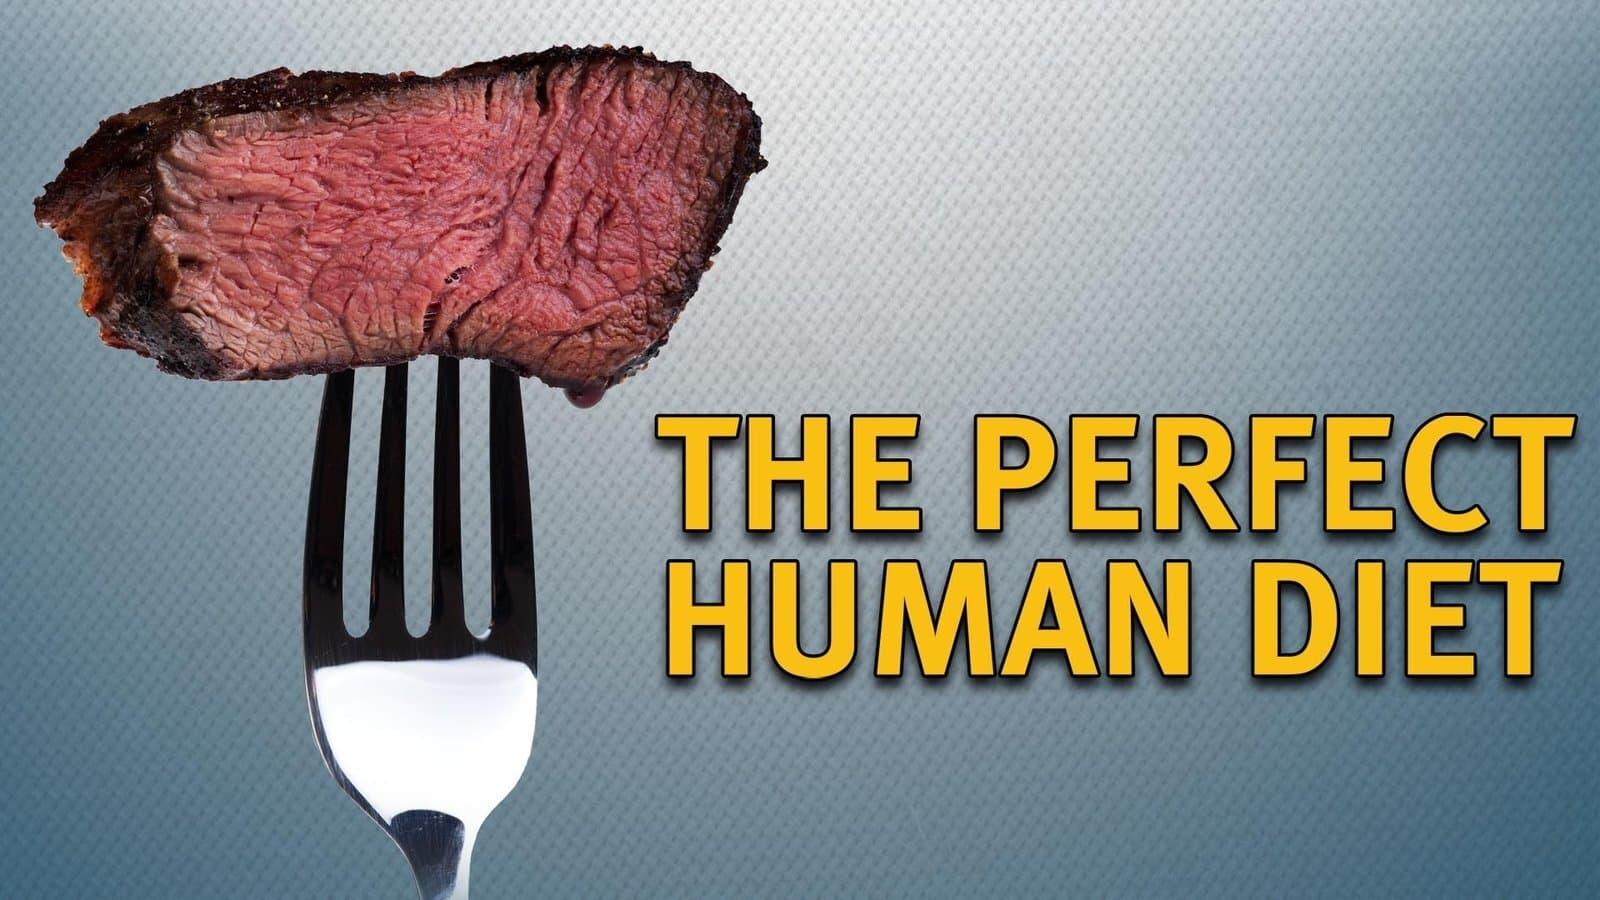 The Perfect Human Diet backdrop